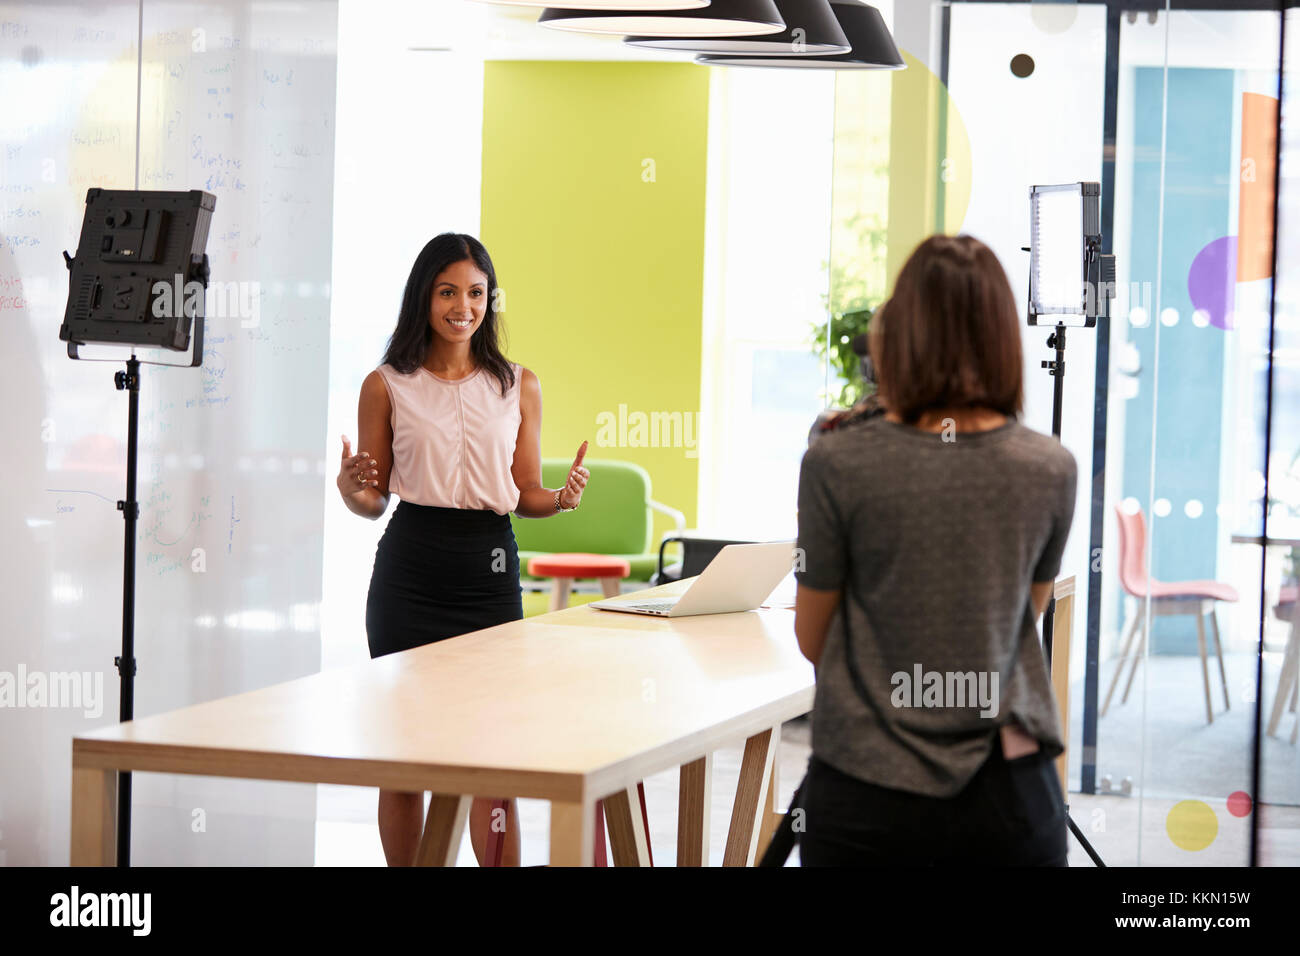 Two women making a corporate demonstration video Stock Photo